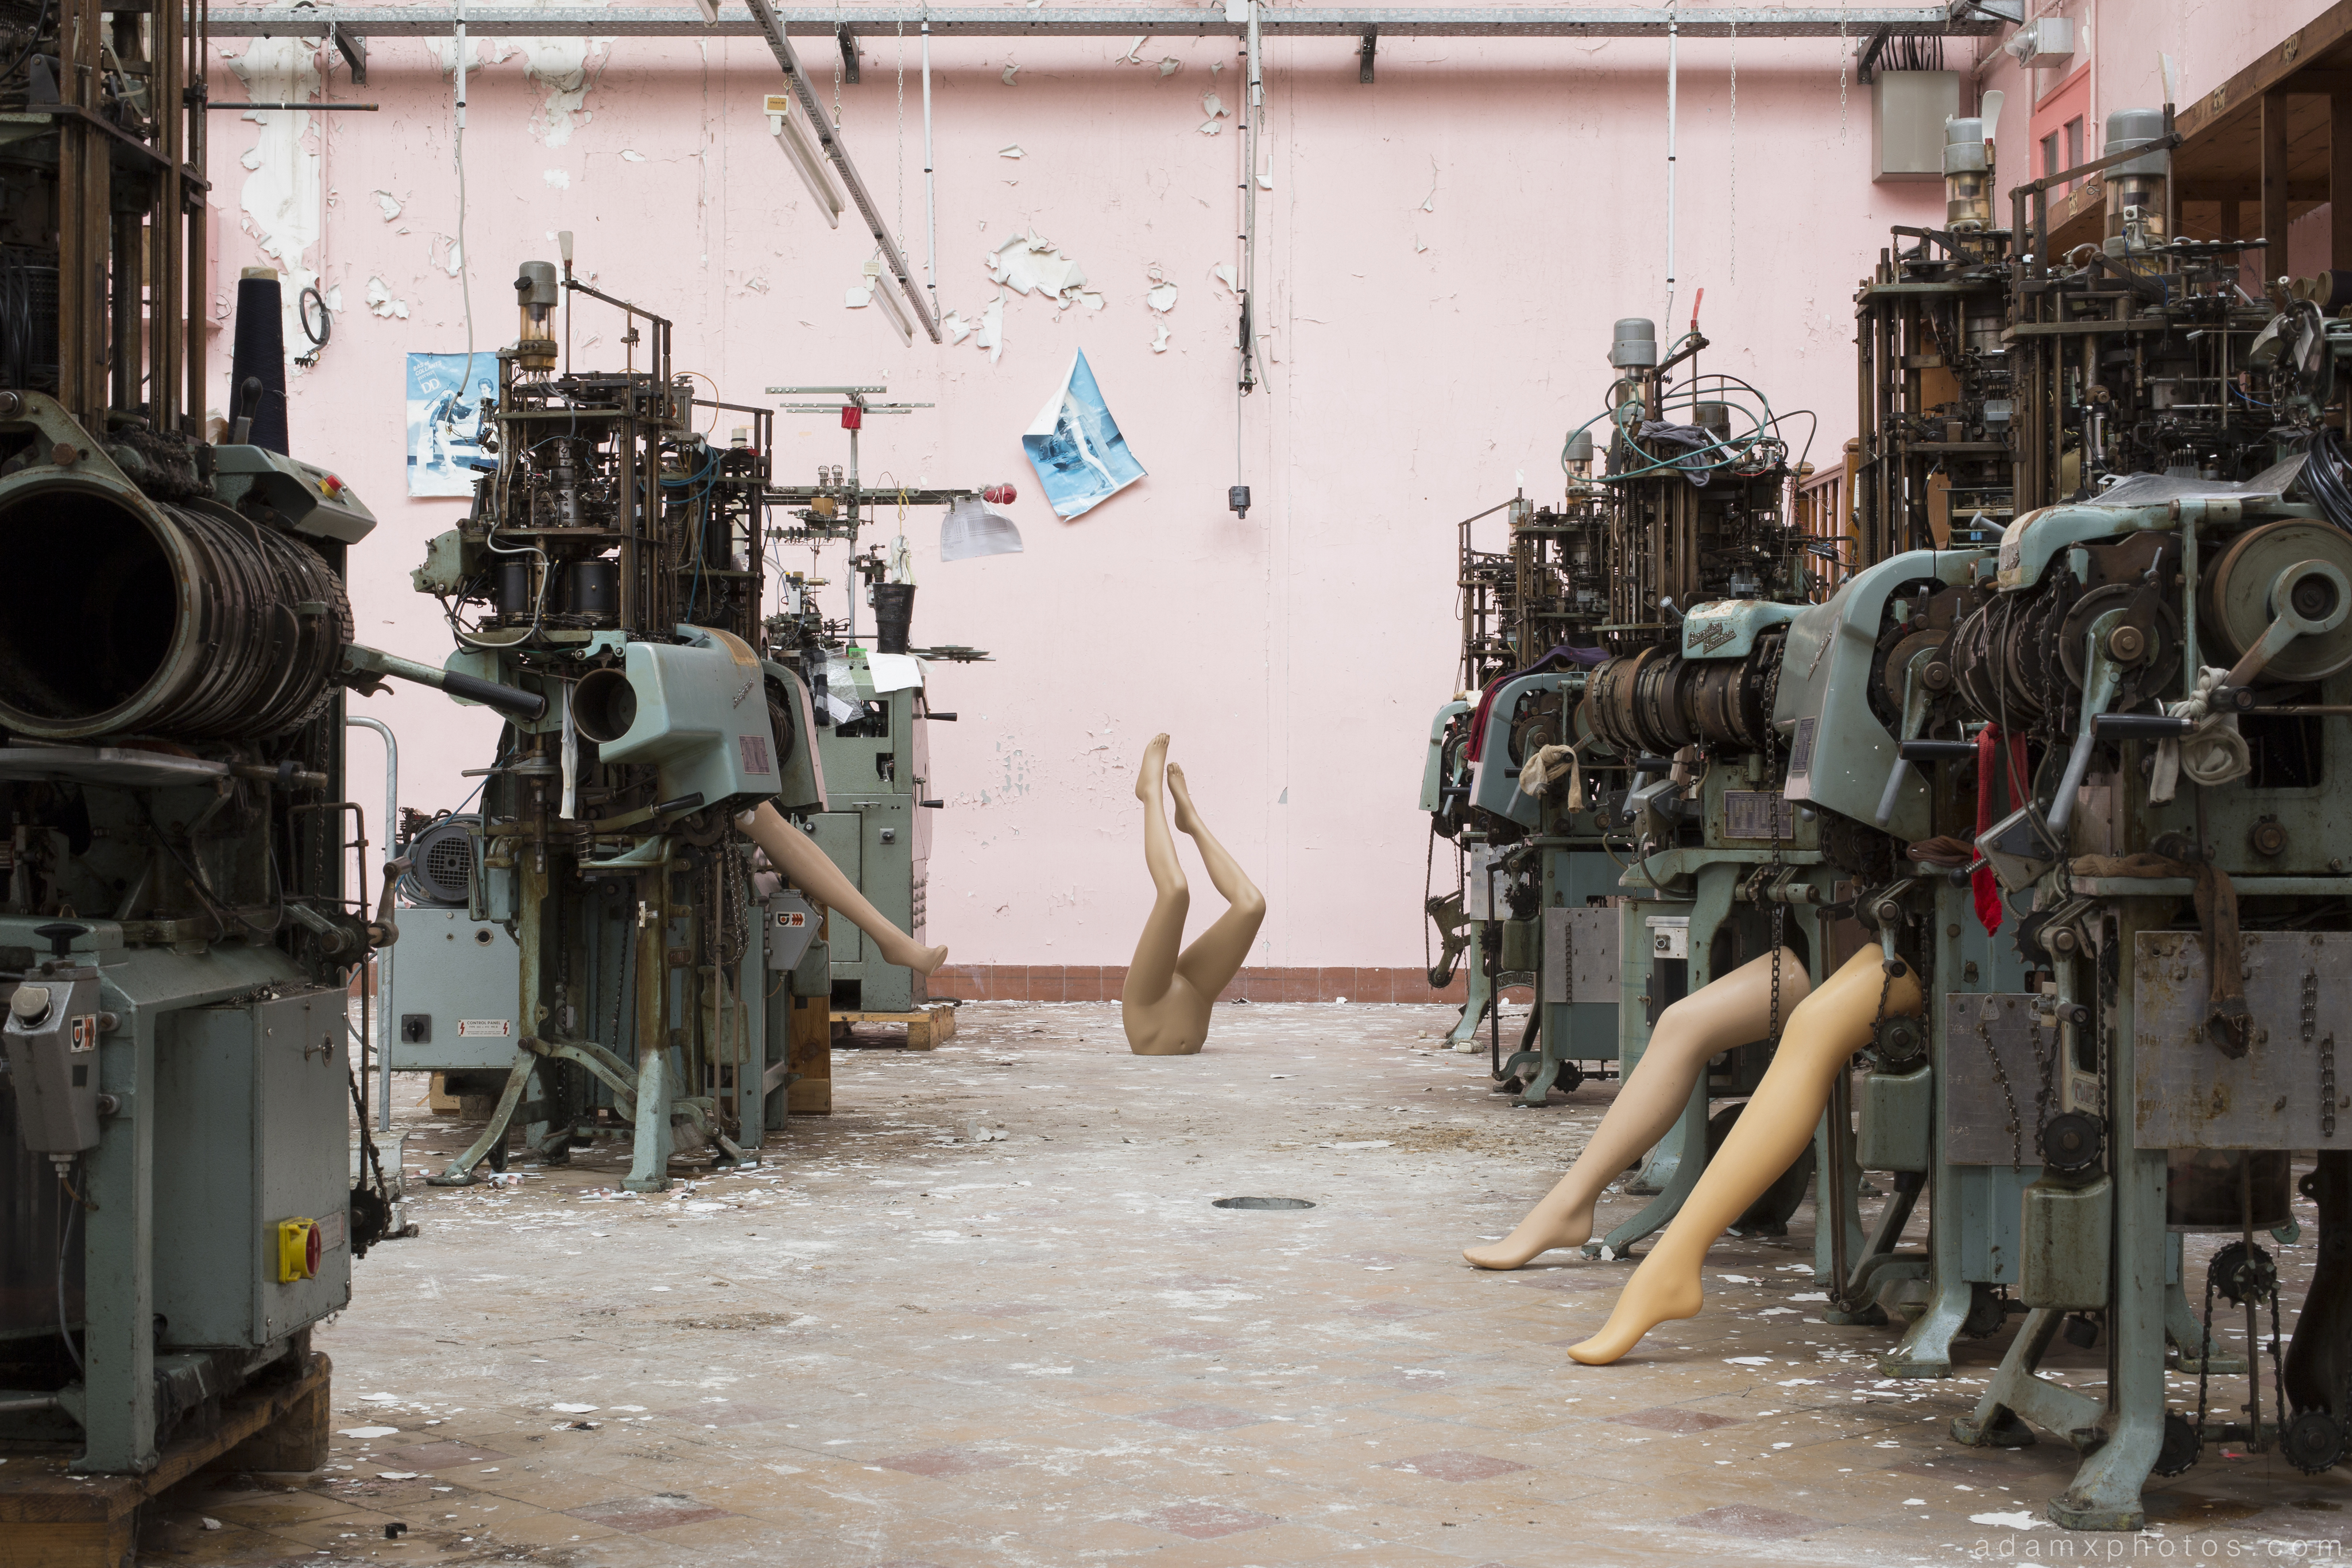 Foot Factory Textile Stockings France Urbex Adam X Urban Exploration 2015 Abandoned decay lost forgotten derelict